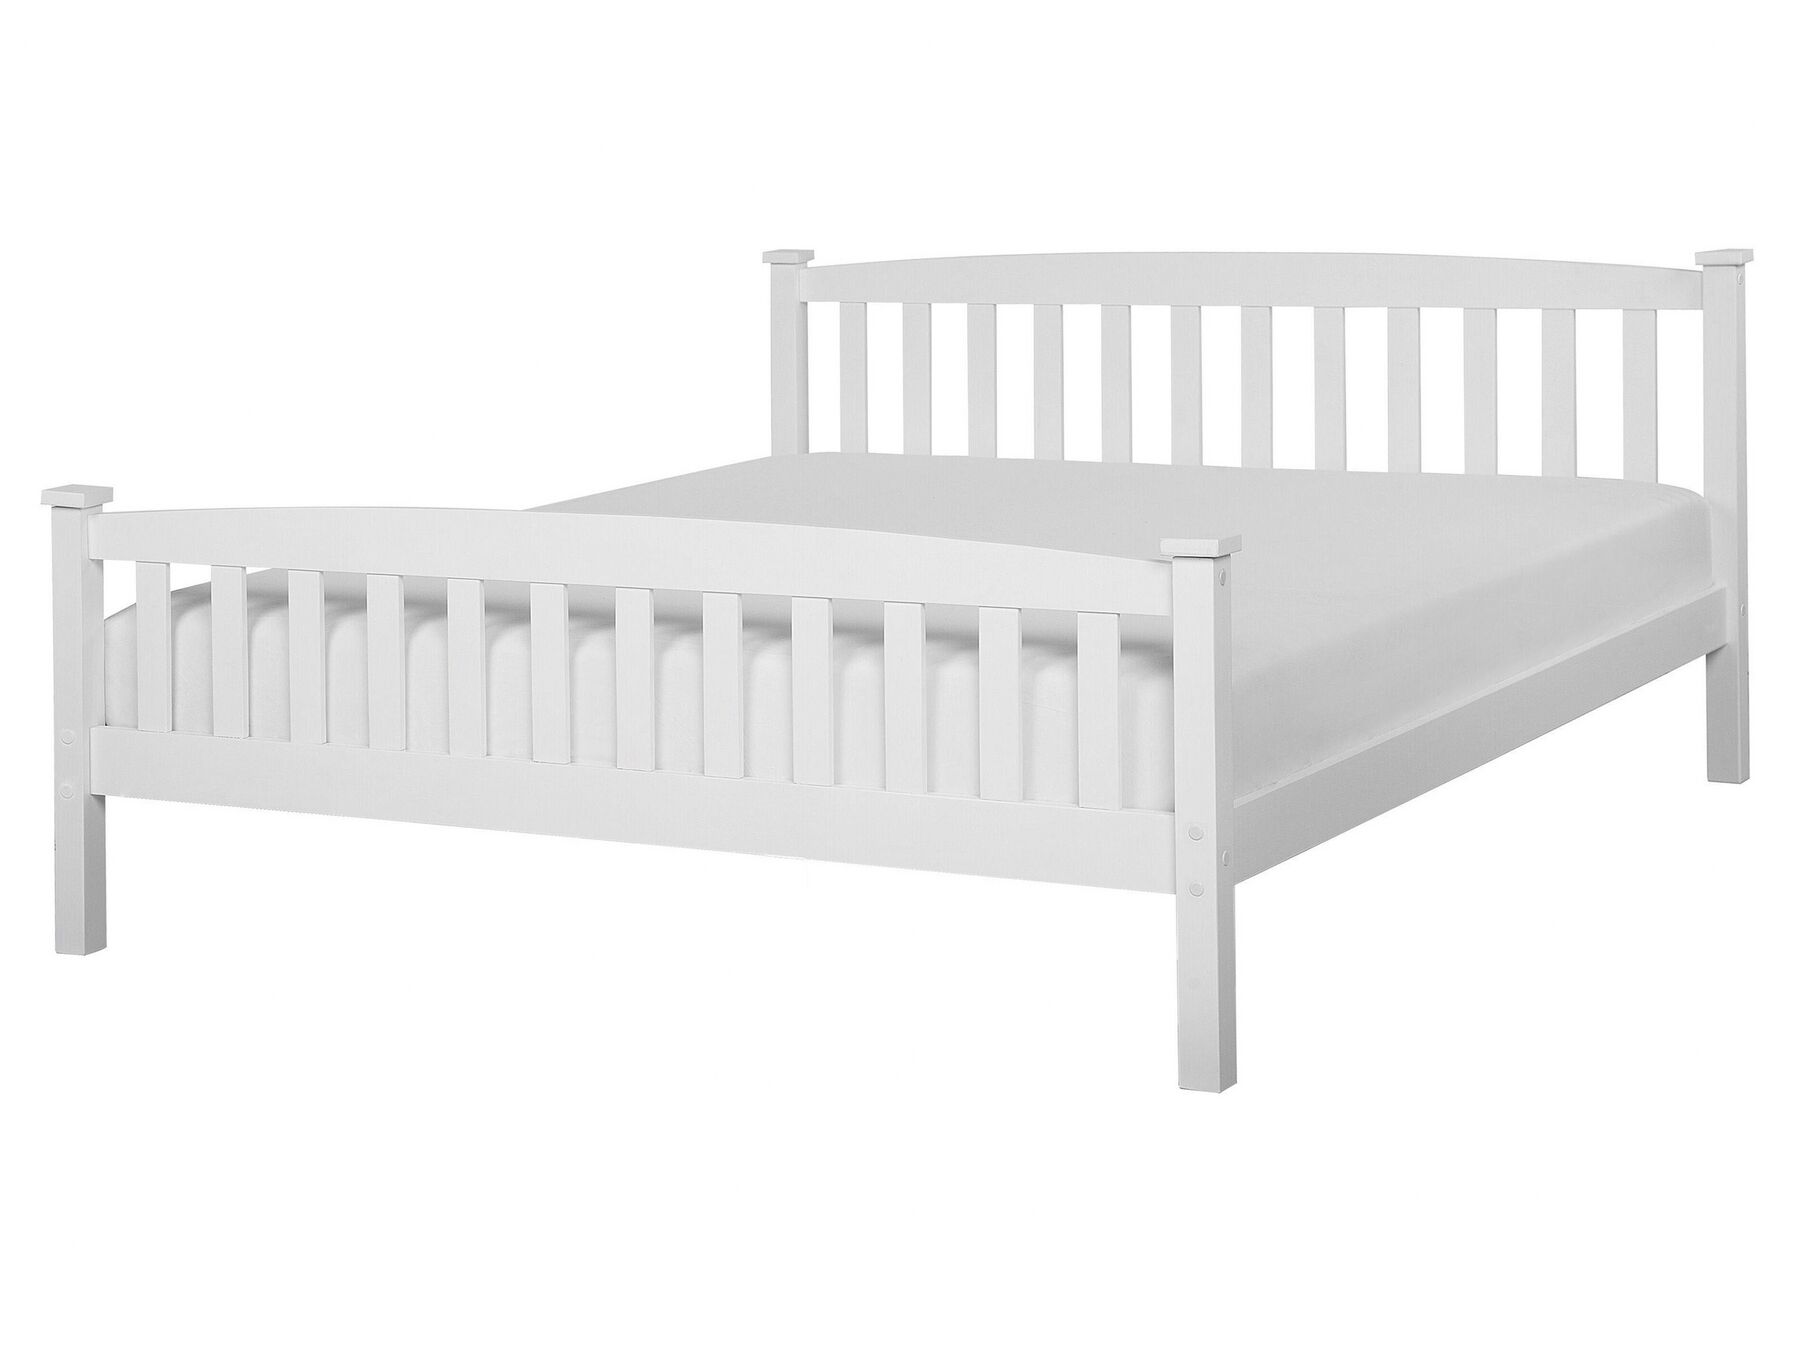 Letto king size in legno in color bianco, 160x200cm GIVERNY_751145